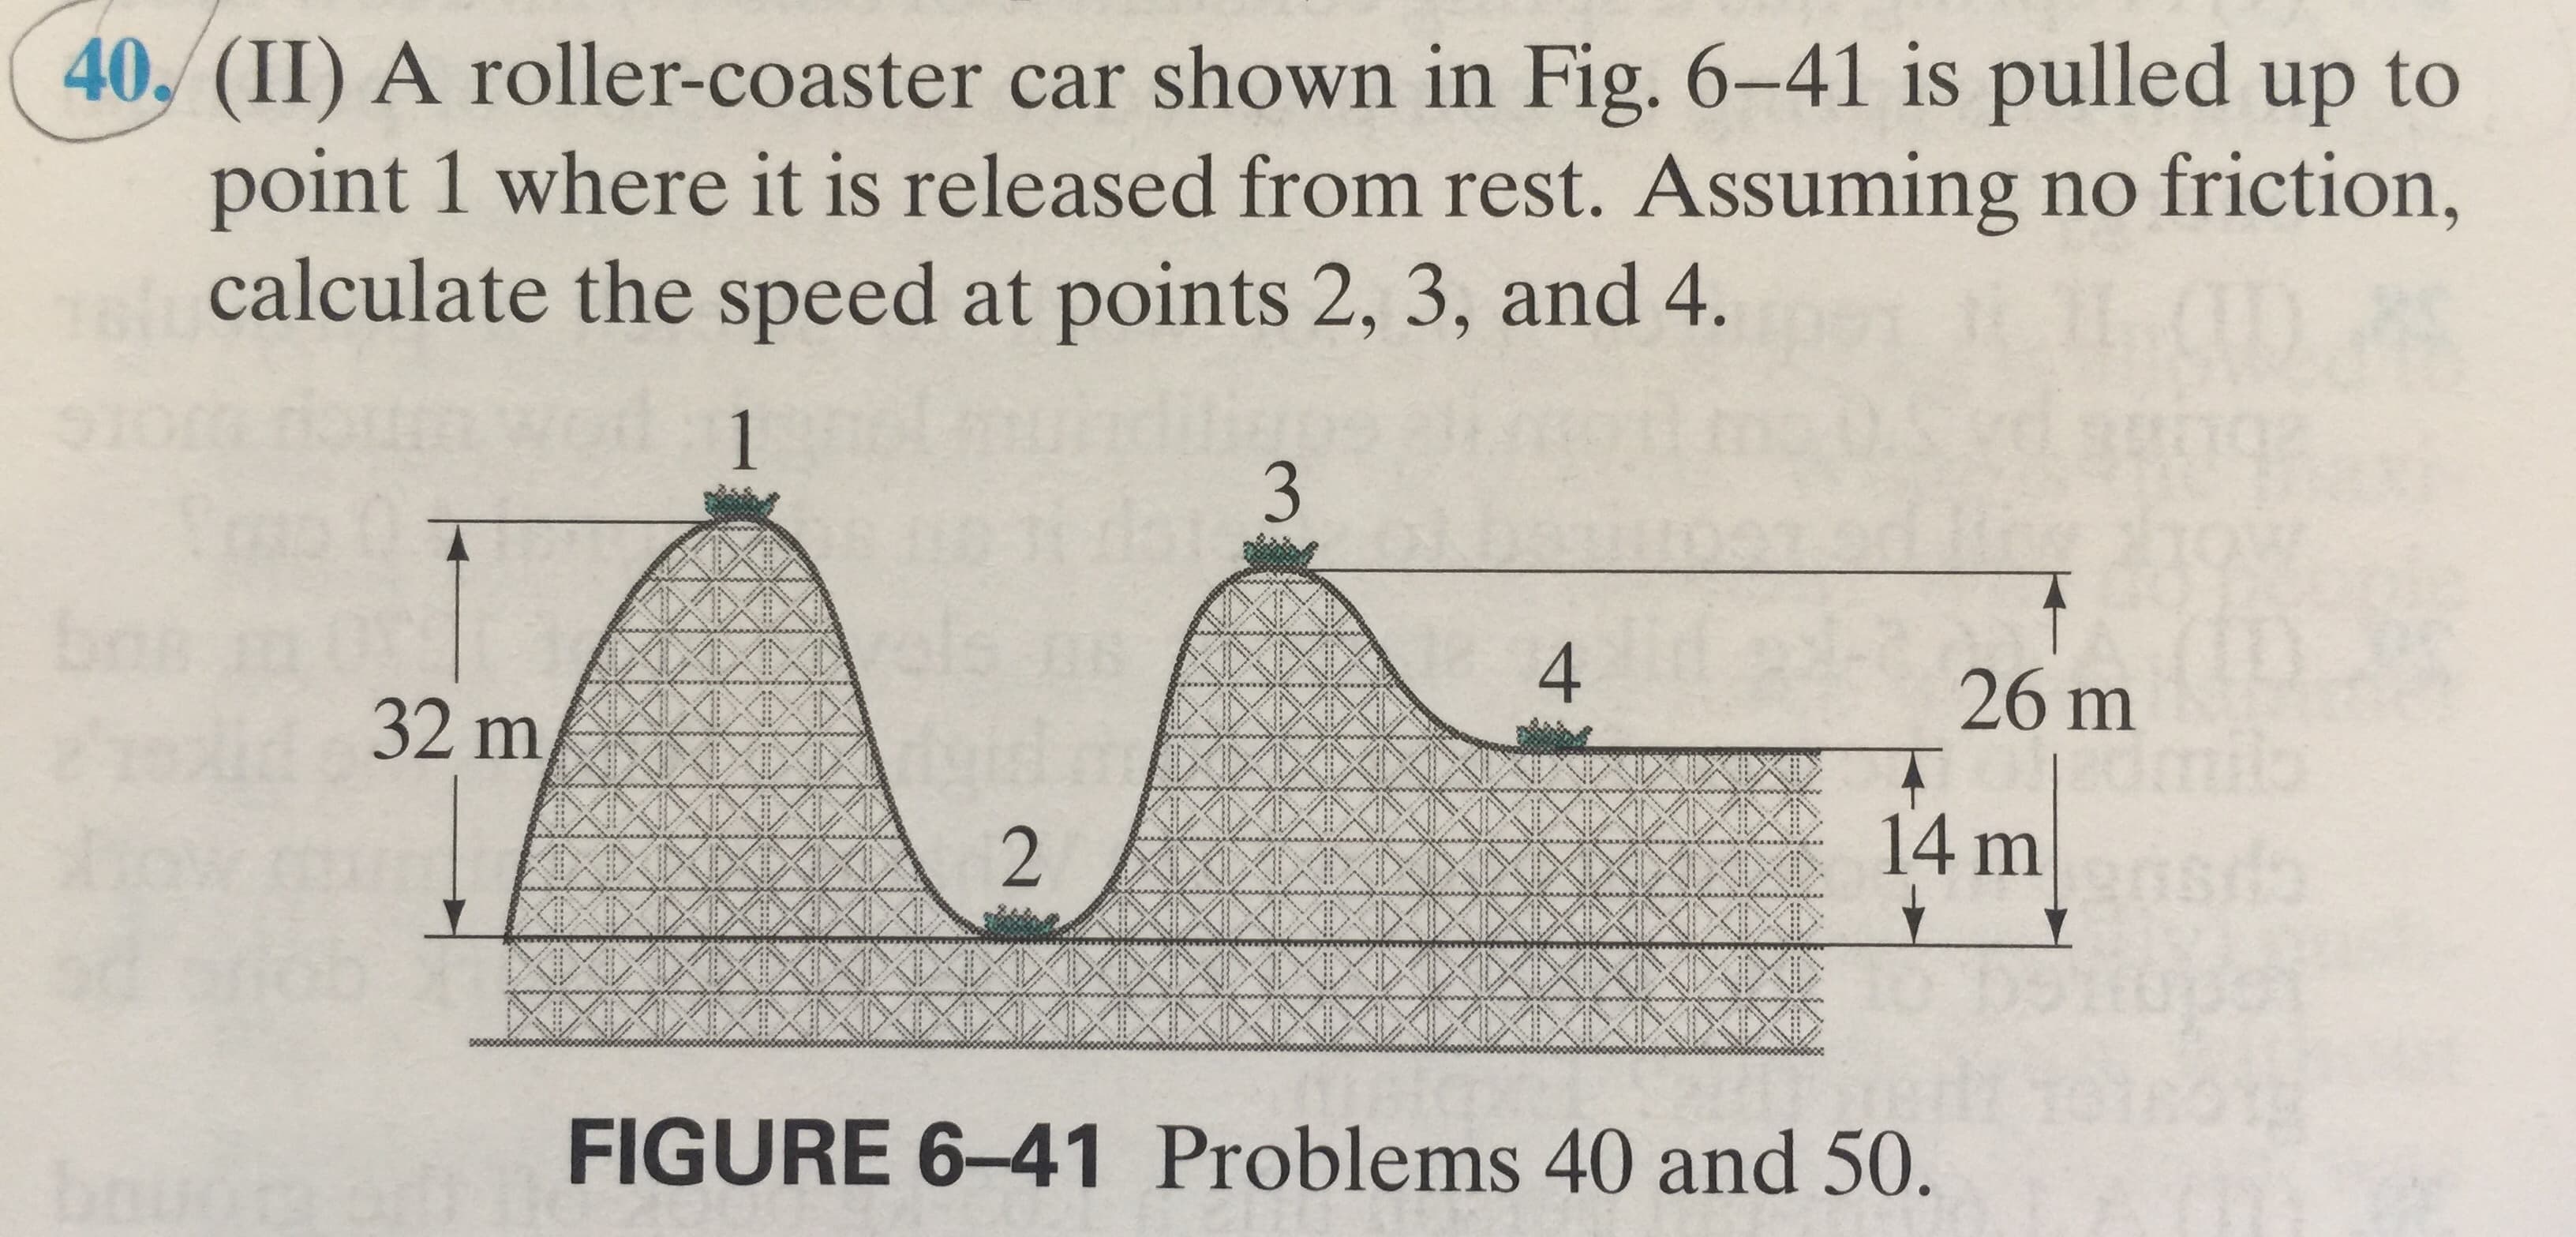 40,(II) A roller-coaster car shown in Fig. 6-41 is pulled up to
point 1 where it is released from rest. Assuming no friction,
calculate the speed at points 2, 3, and 4.
3
bo
4
26 m
32 m
14 m
4
2
FIGURE 6-41 Problems 40 and 50.
